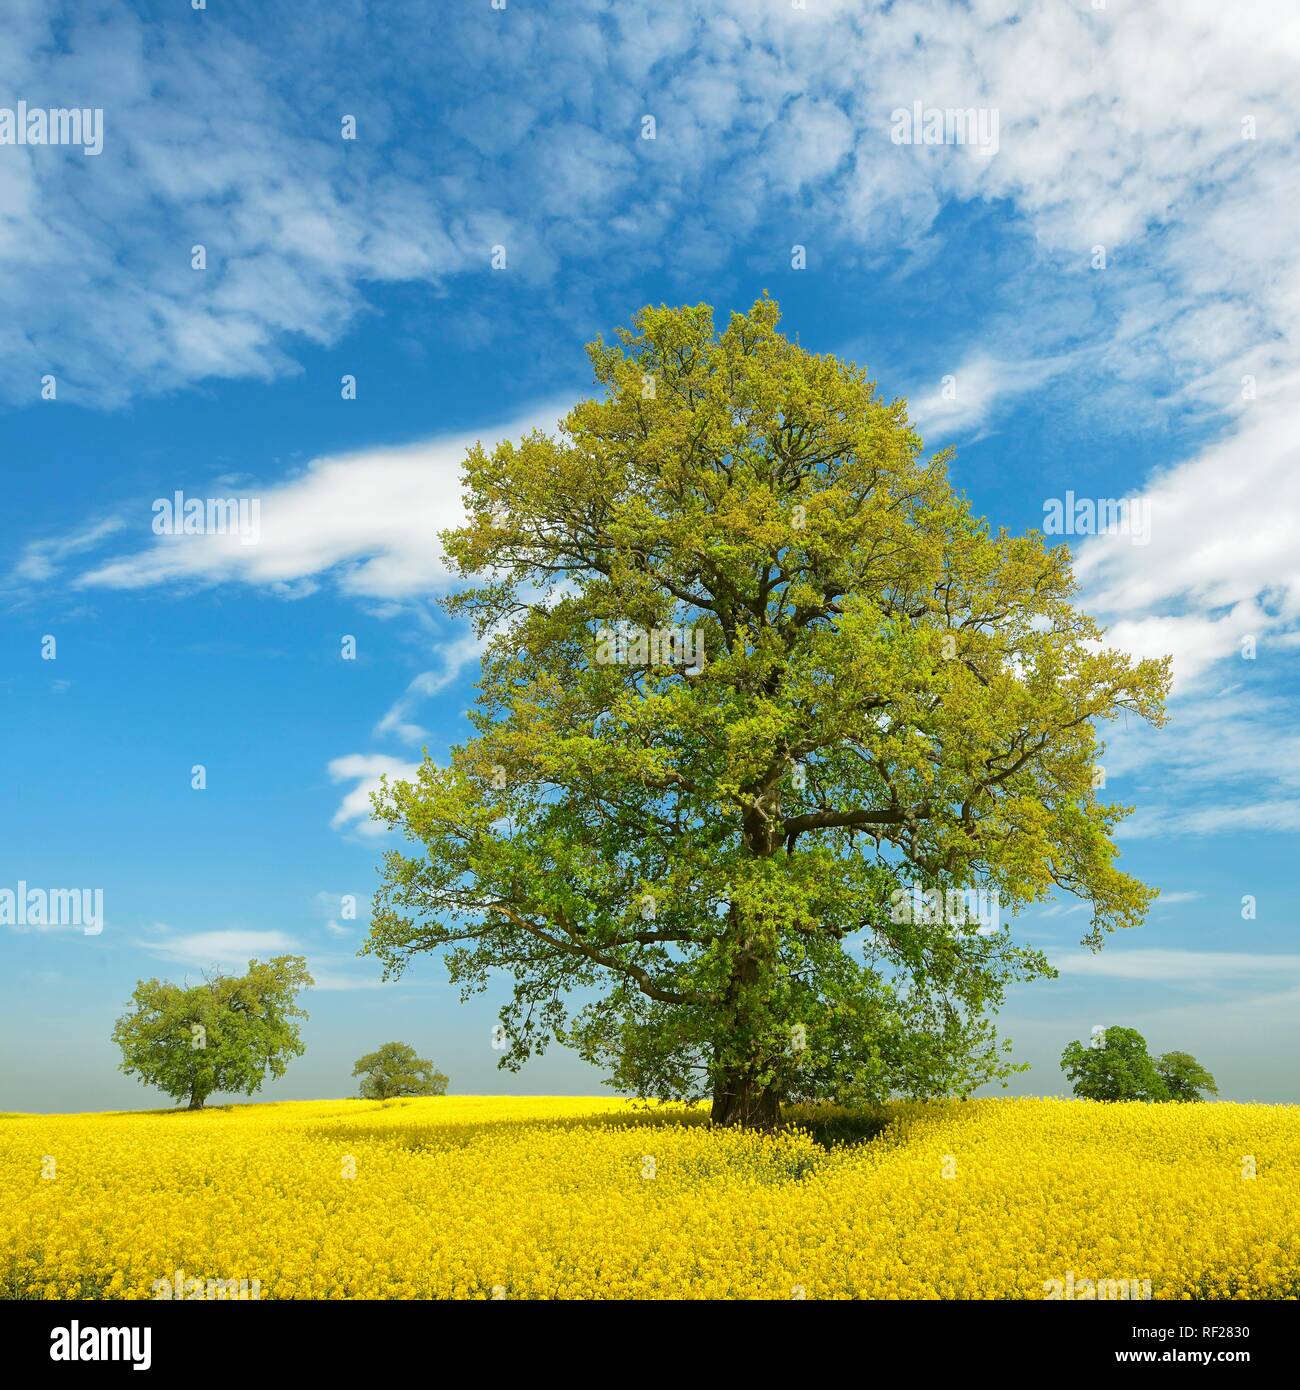 Blooming rape field with old solitary oaks, blue sky with fair weather clouds, Mecklenburgische Schweiz Stock Photo